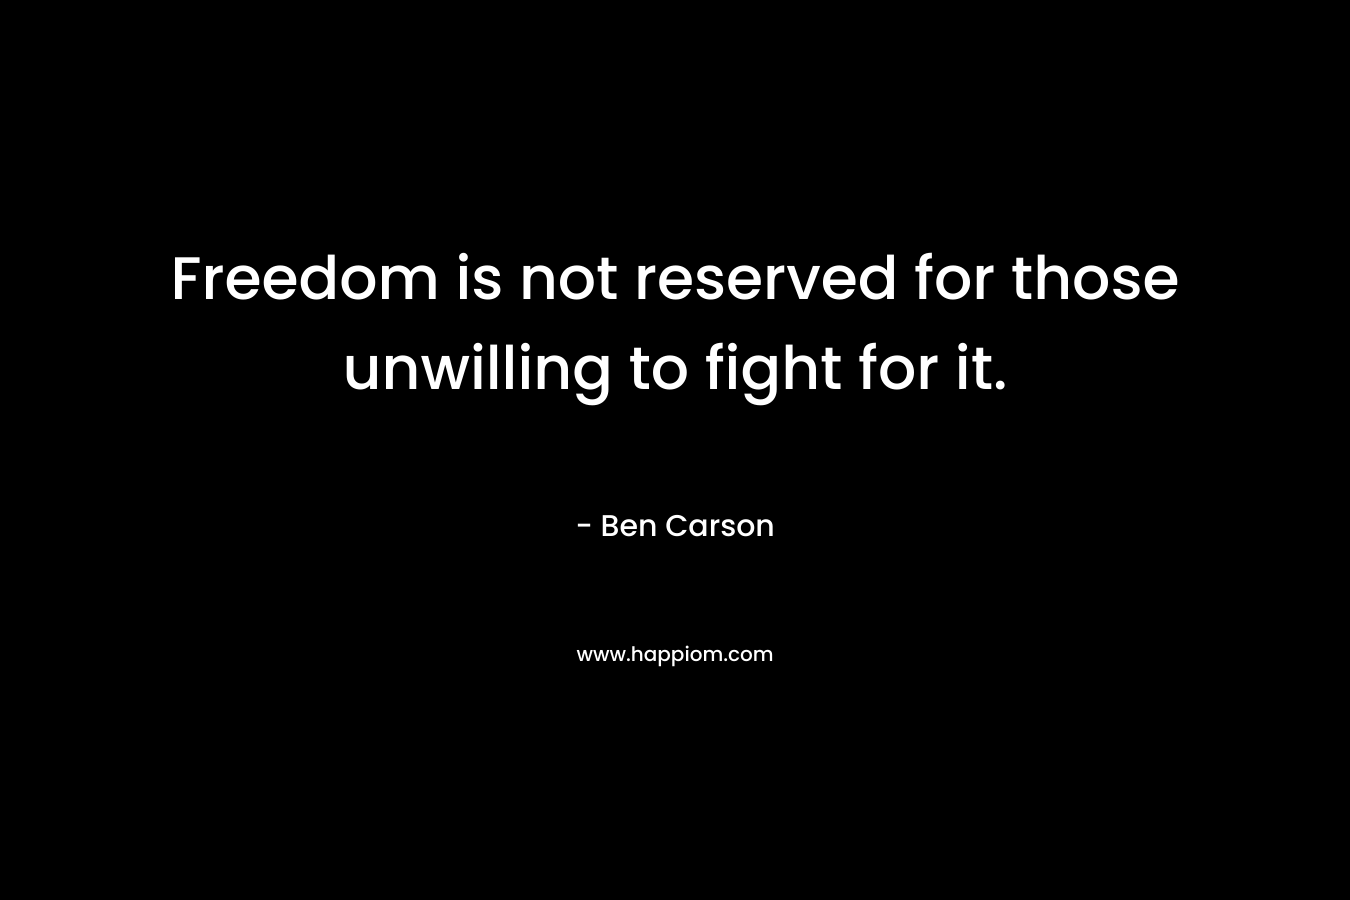 Freedom is not reserved for those unwilling to fight for it. – Ben Carson